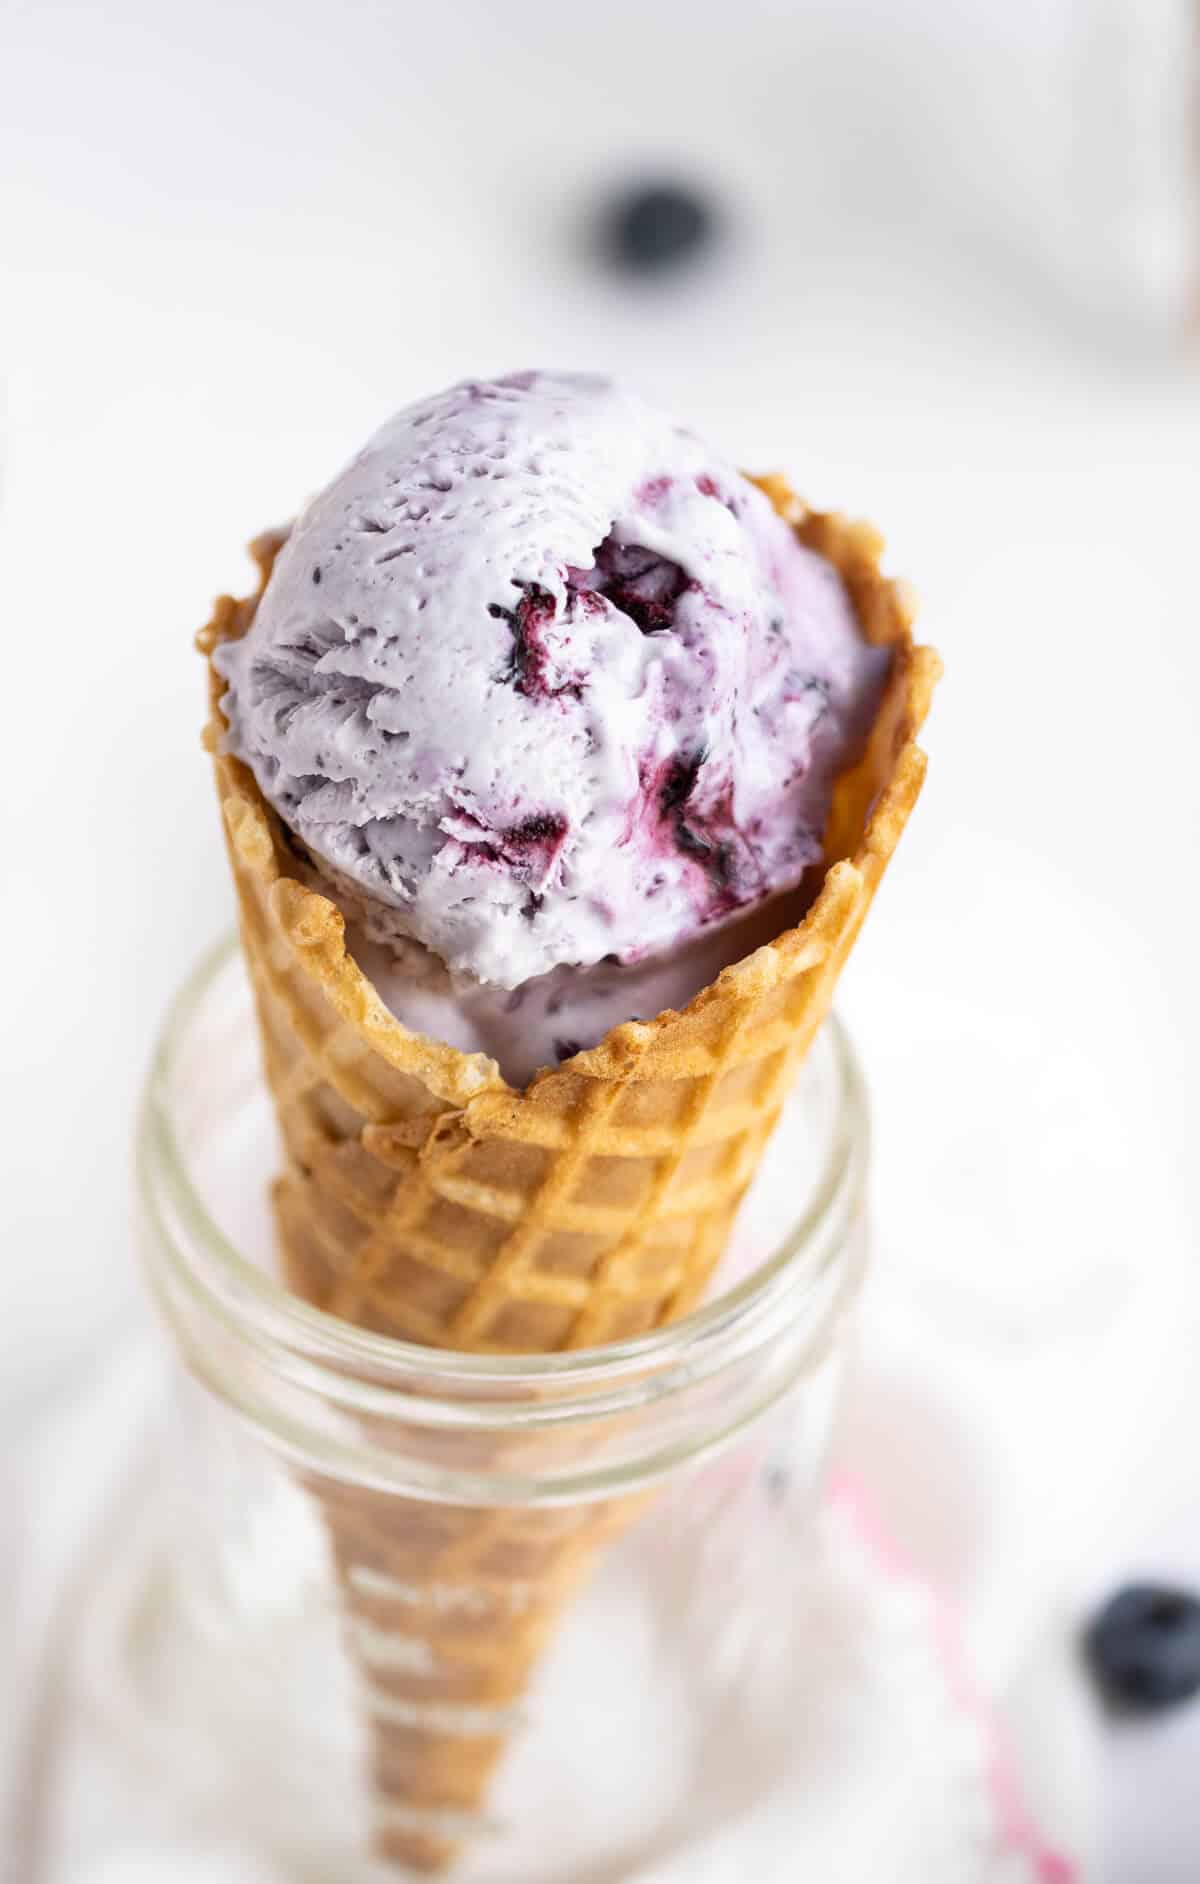 Blueberry ice cream in a waffle cone.